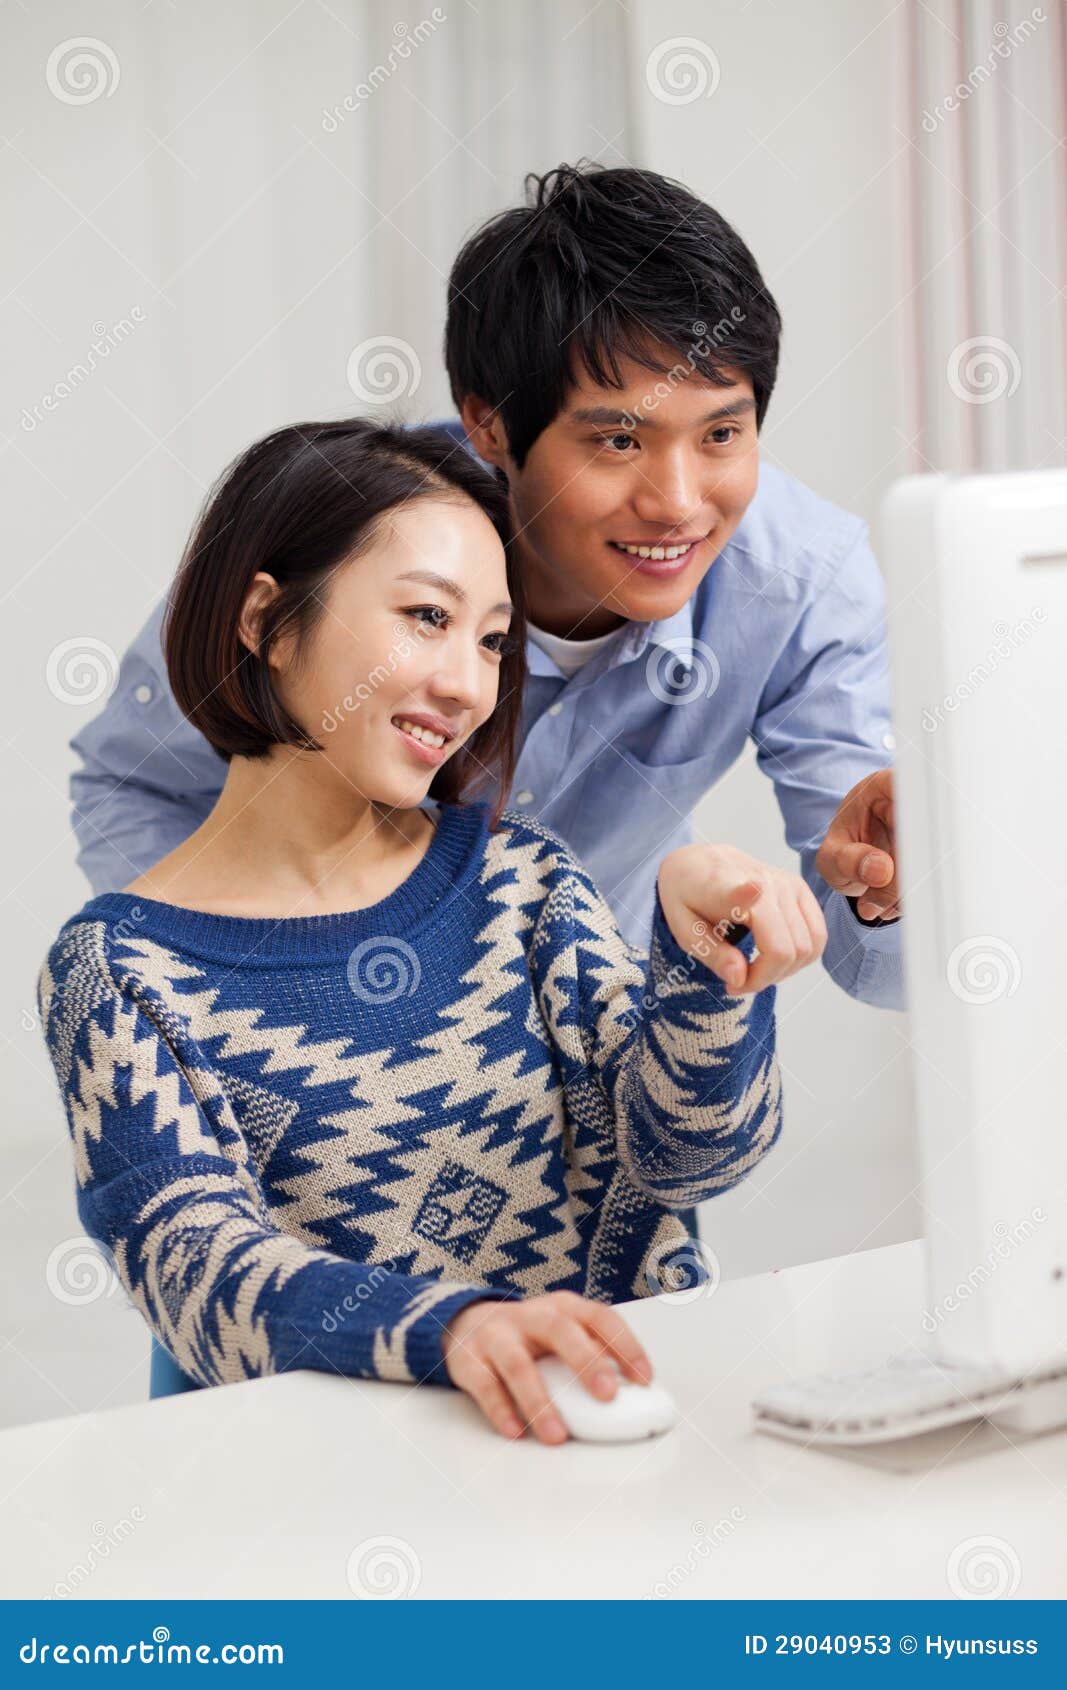 https://thumbs.dreamstime.com/z/young-asian-couple-using-pc-29040953.jpg